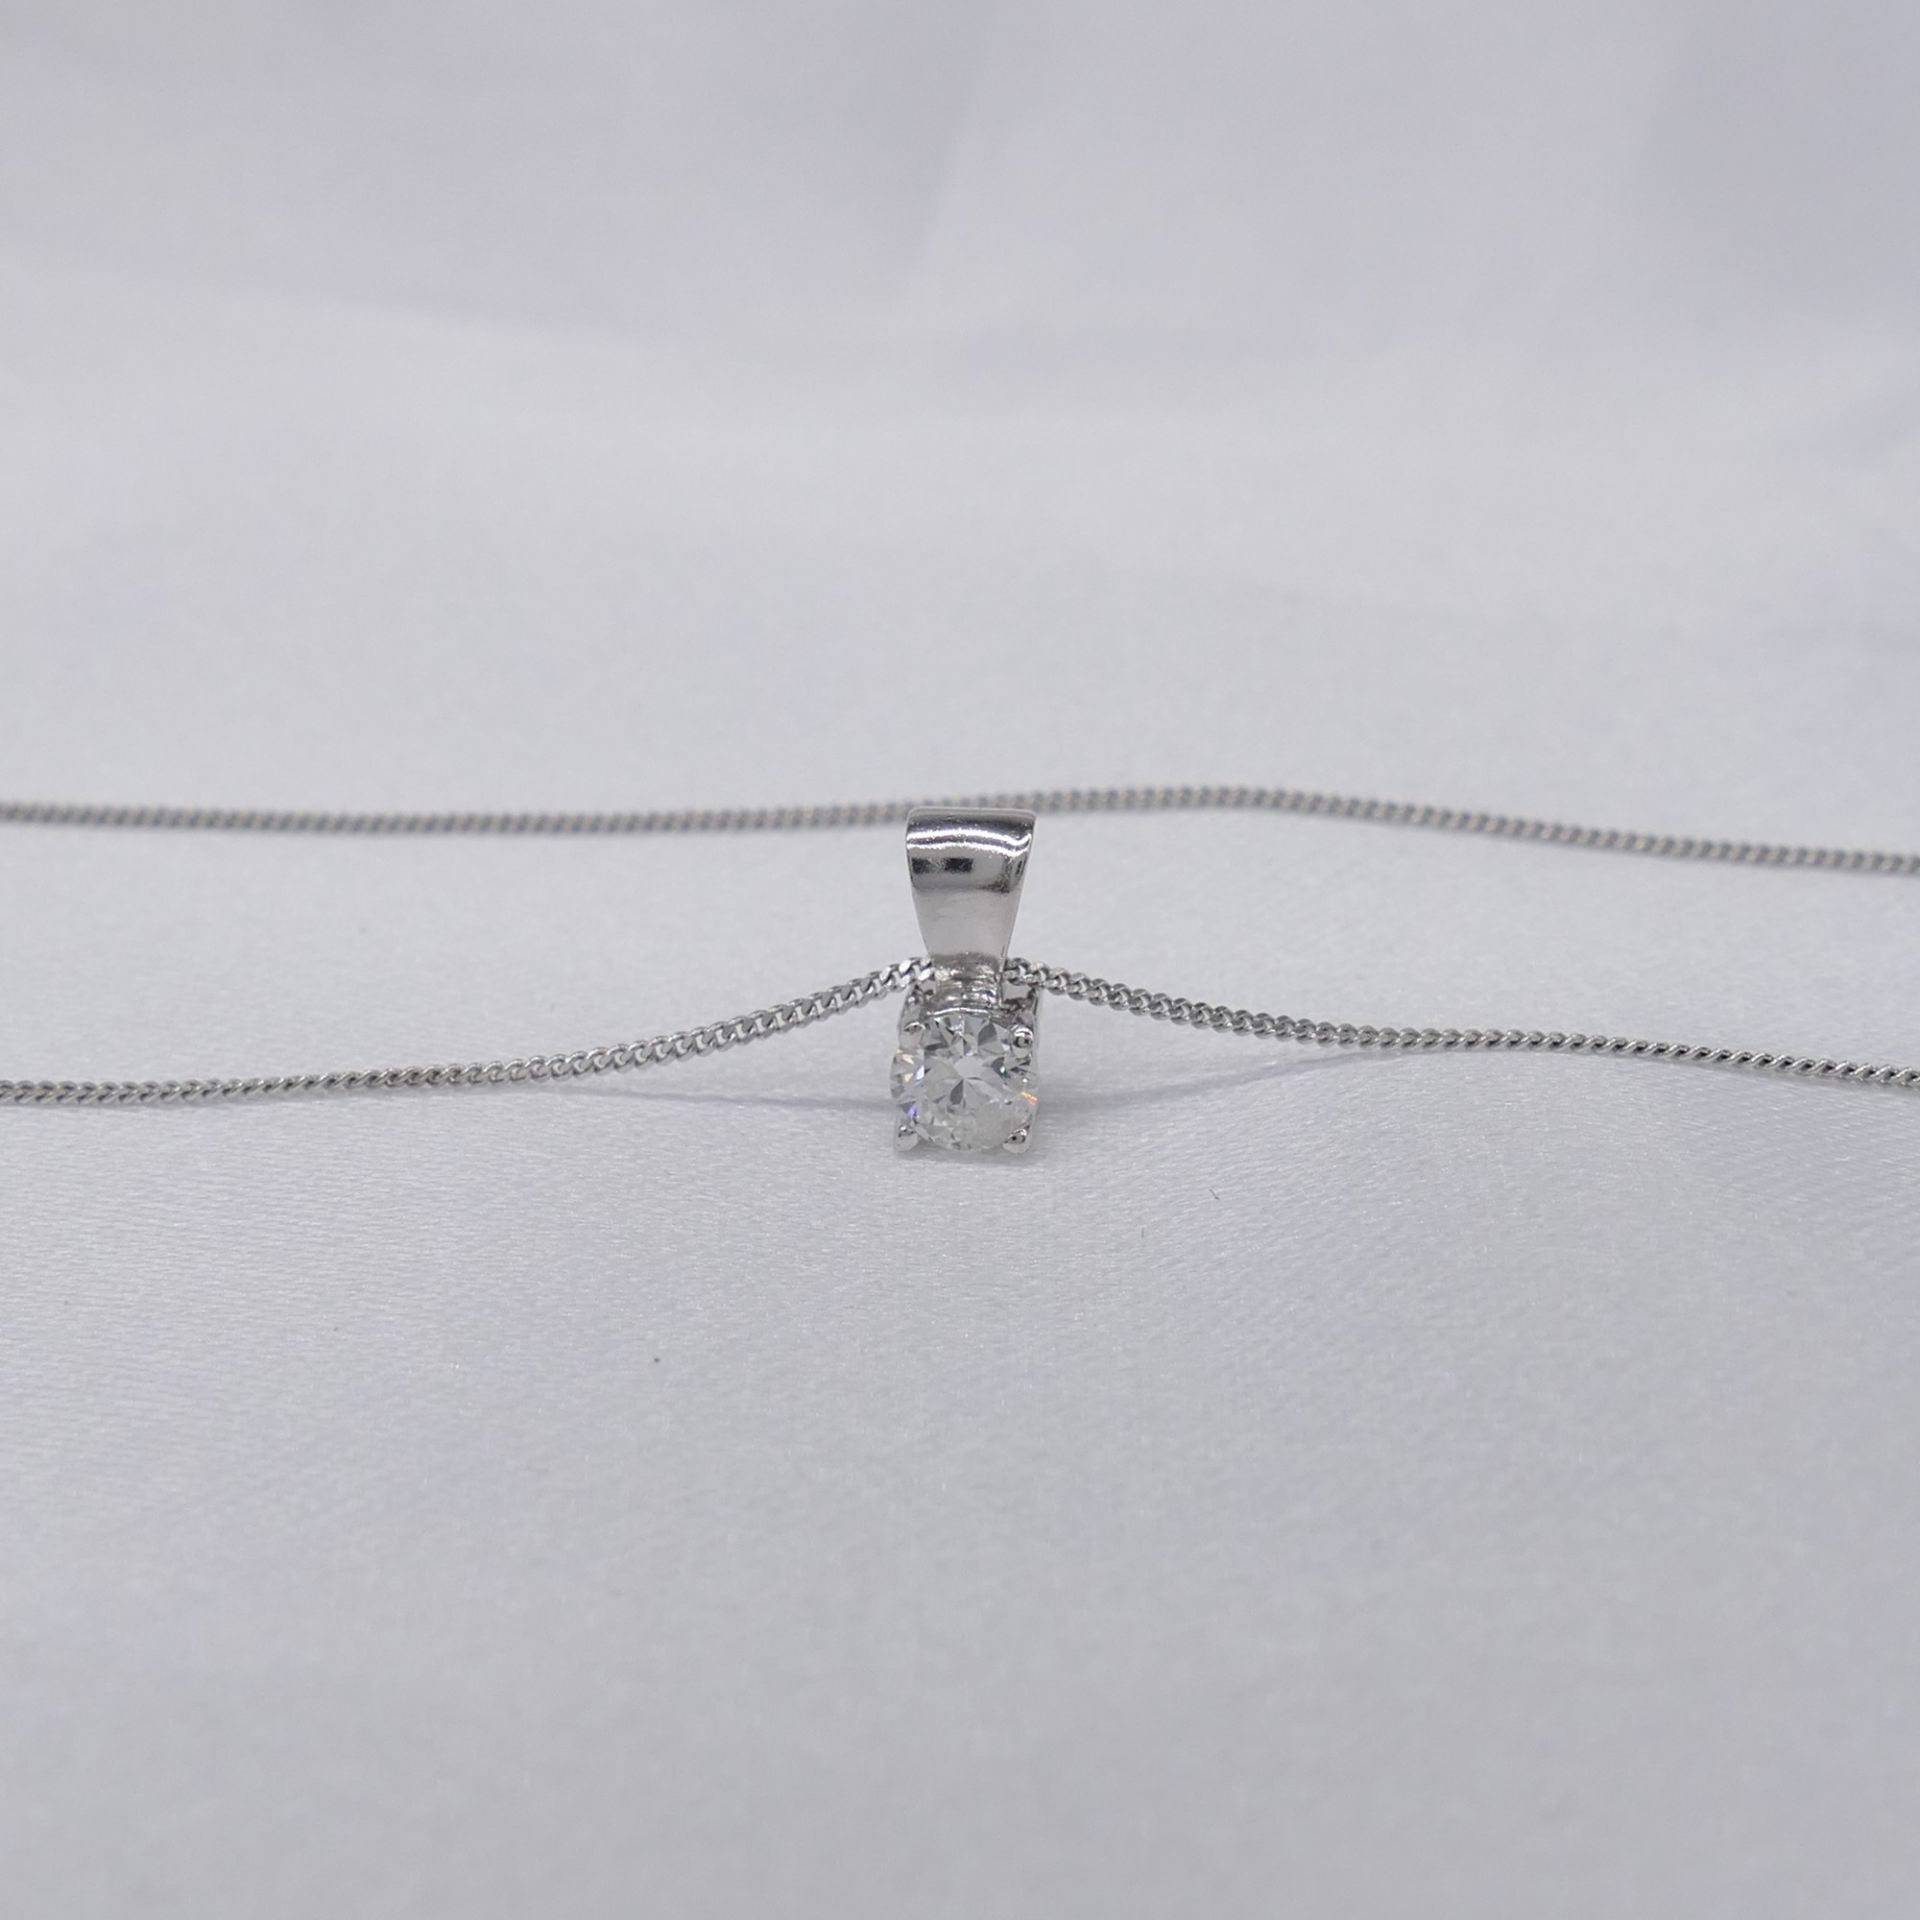 0.15 Carat Diamond Solitaire Necklace In White Gold, With Magnetic Gifting Box - Image 5 of 8